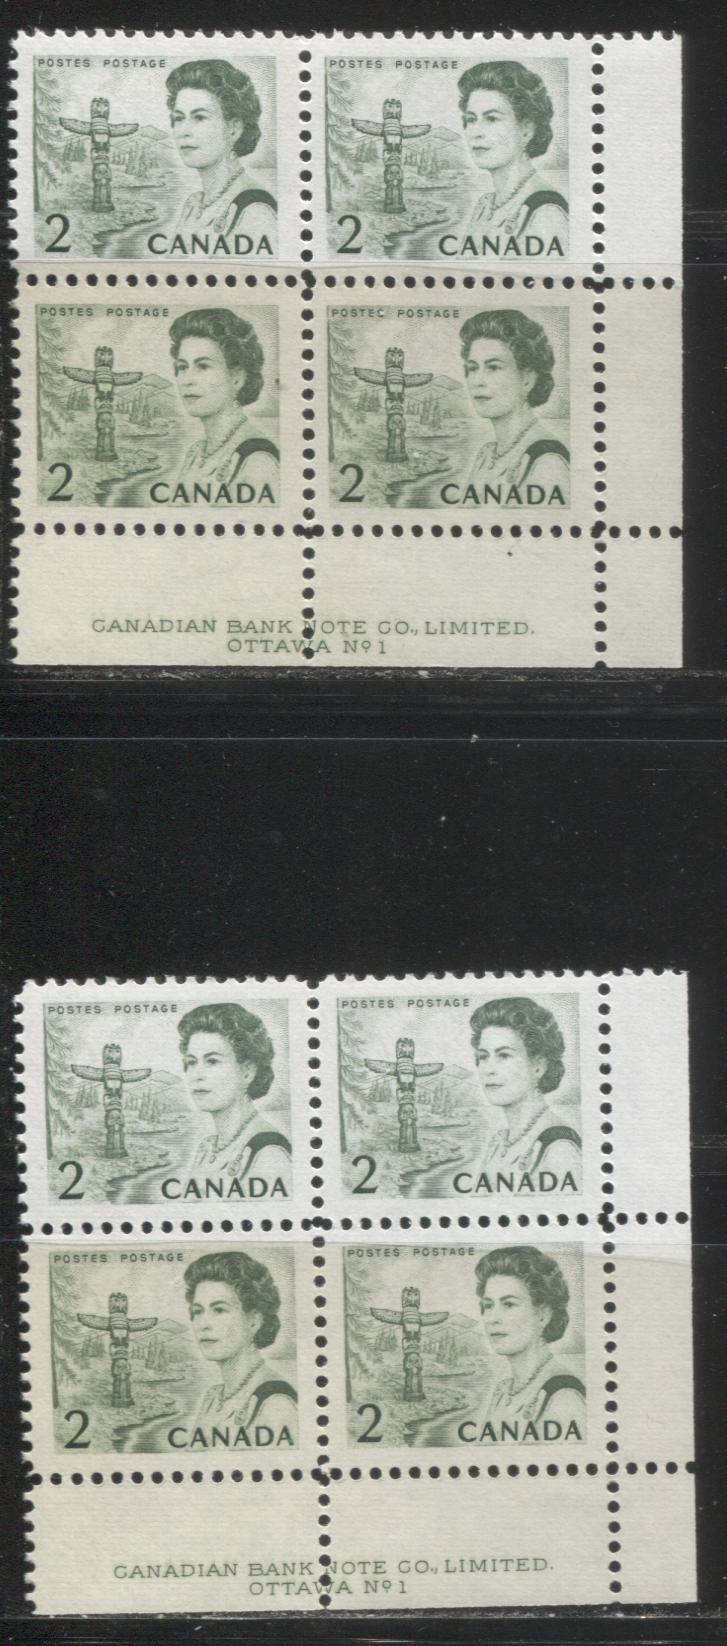 Lot #175 Canada #455iii 2c Bright Green, Pacific Coast Totem Pole, 1967-1973 Centennial Issue, Two VFNH LR Plate 1 Blocks on Two Different LF Ribbed Papers, Eggshell PVA Gum